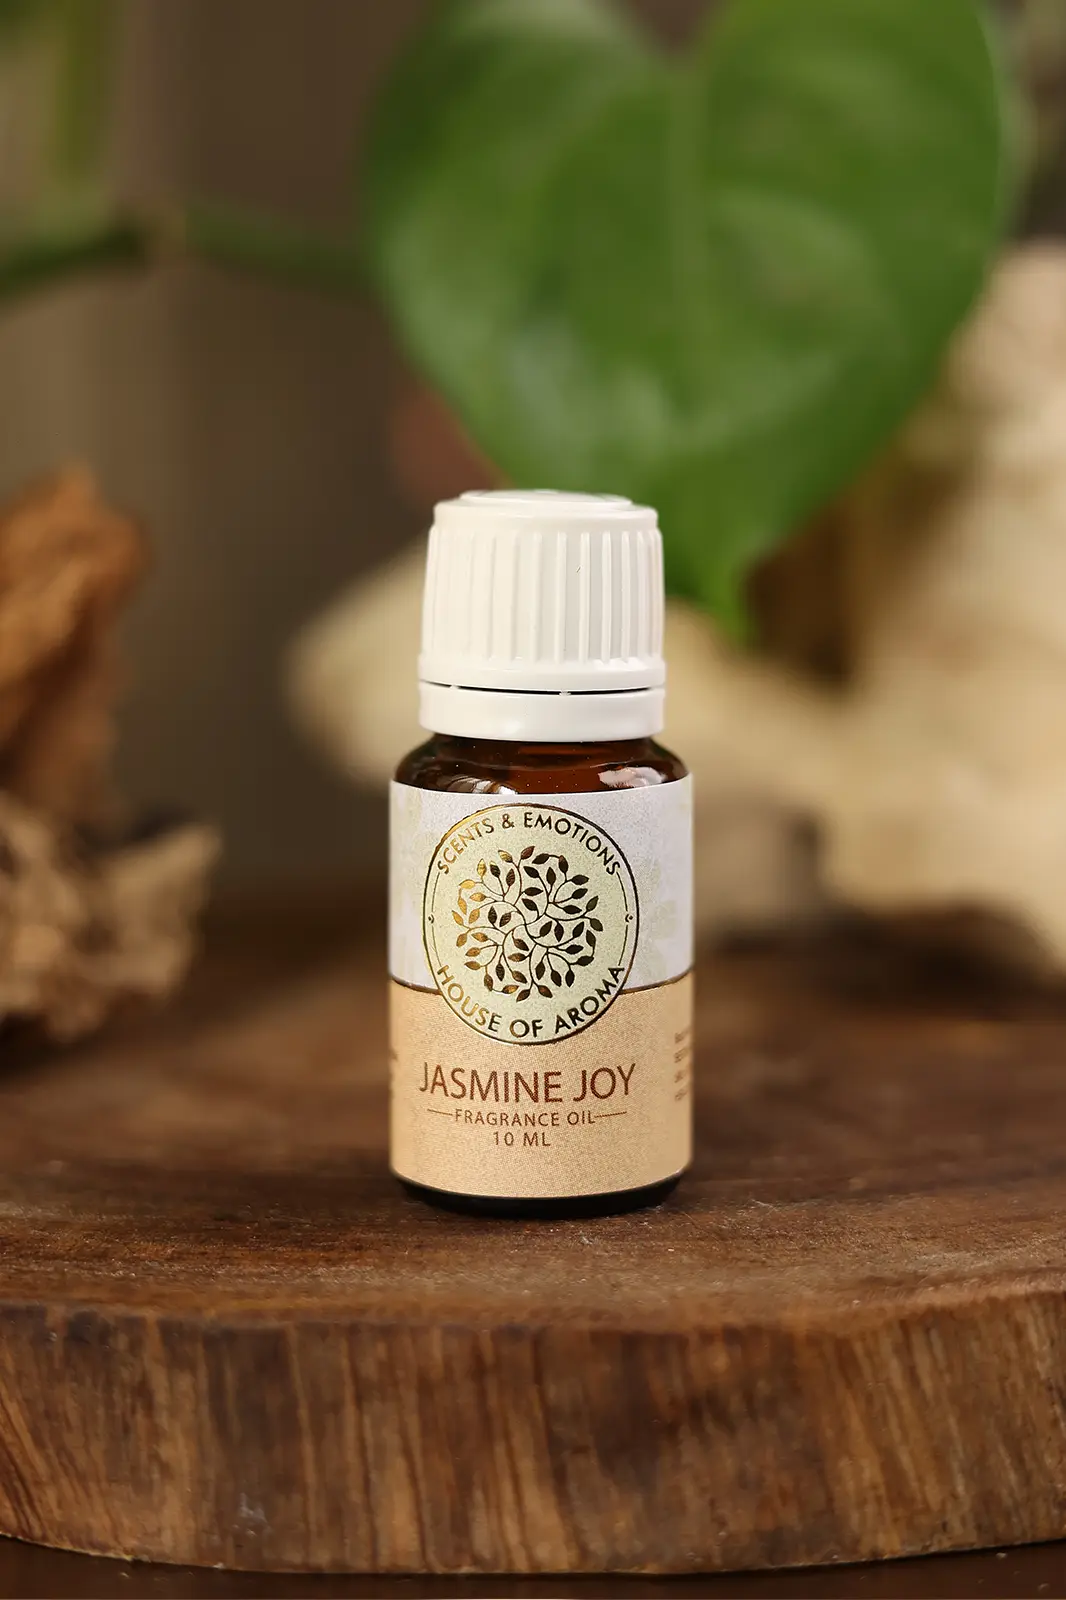 Fragrance Oil, Aroma oil, Synthetic oils, Fragrance oil for candles, oil for diffusers, Aromatic oil, Candle oil, Aromatherapy oil, oil manufacturers, House of Aroma, Jasmine Joy Fragrance Oil, jasmine oil benefits for hair, jasmine essential oil emotional benefits, floral fragrance oils, jasmine oil for bathrooms, pure oil, floral fragrances, foral aroma oil, jasmine oil